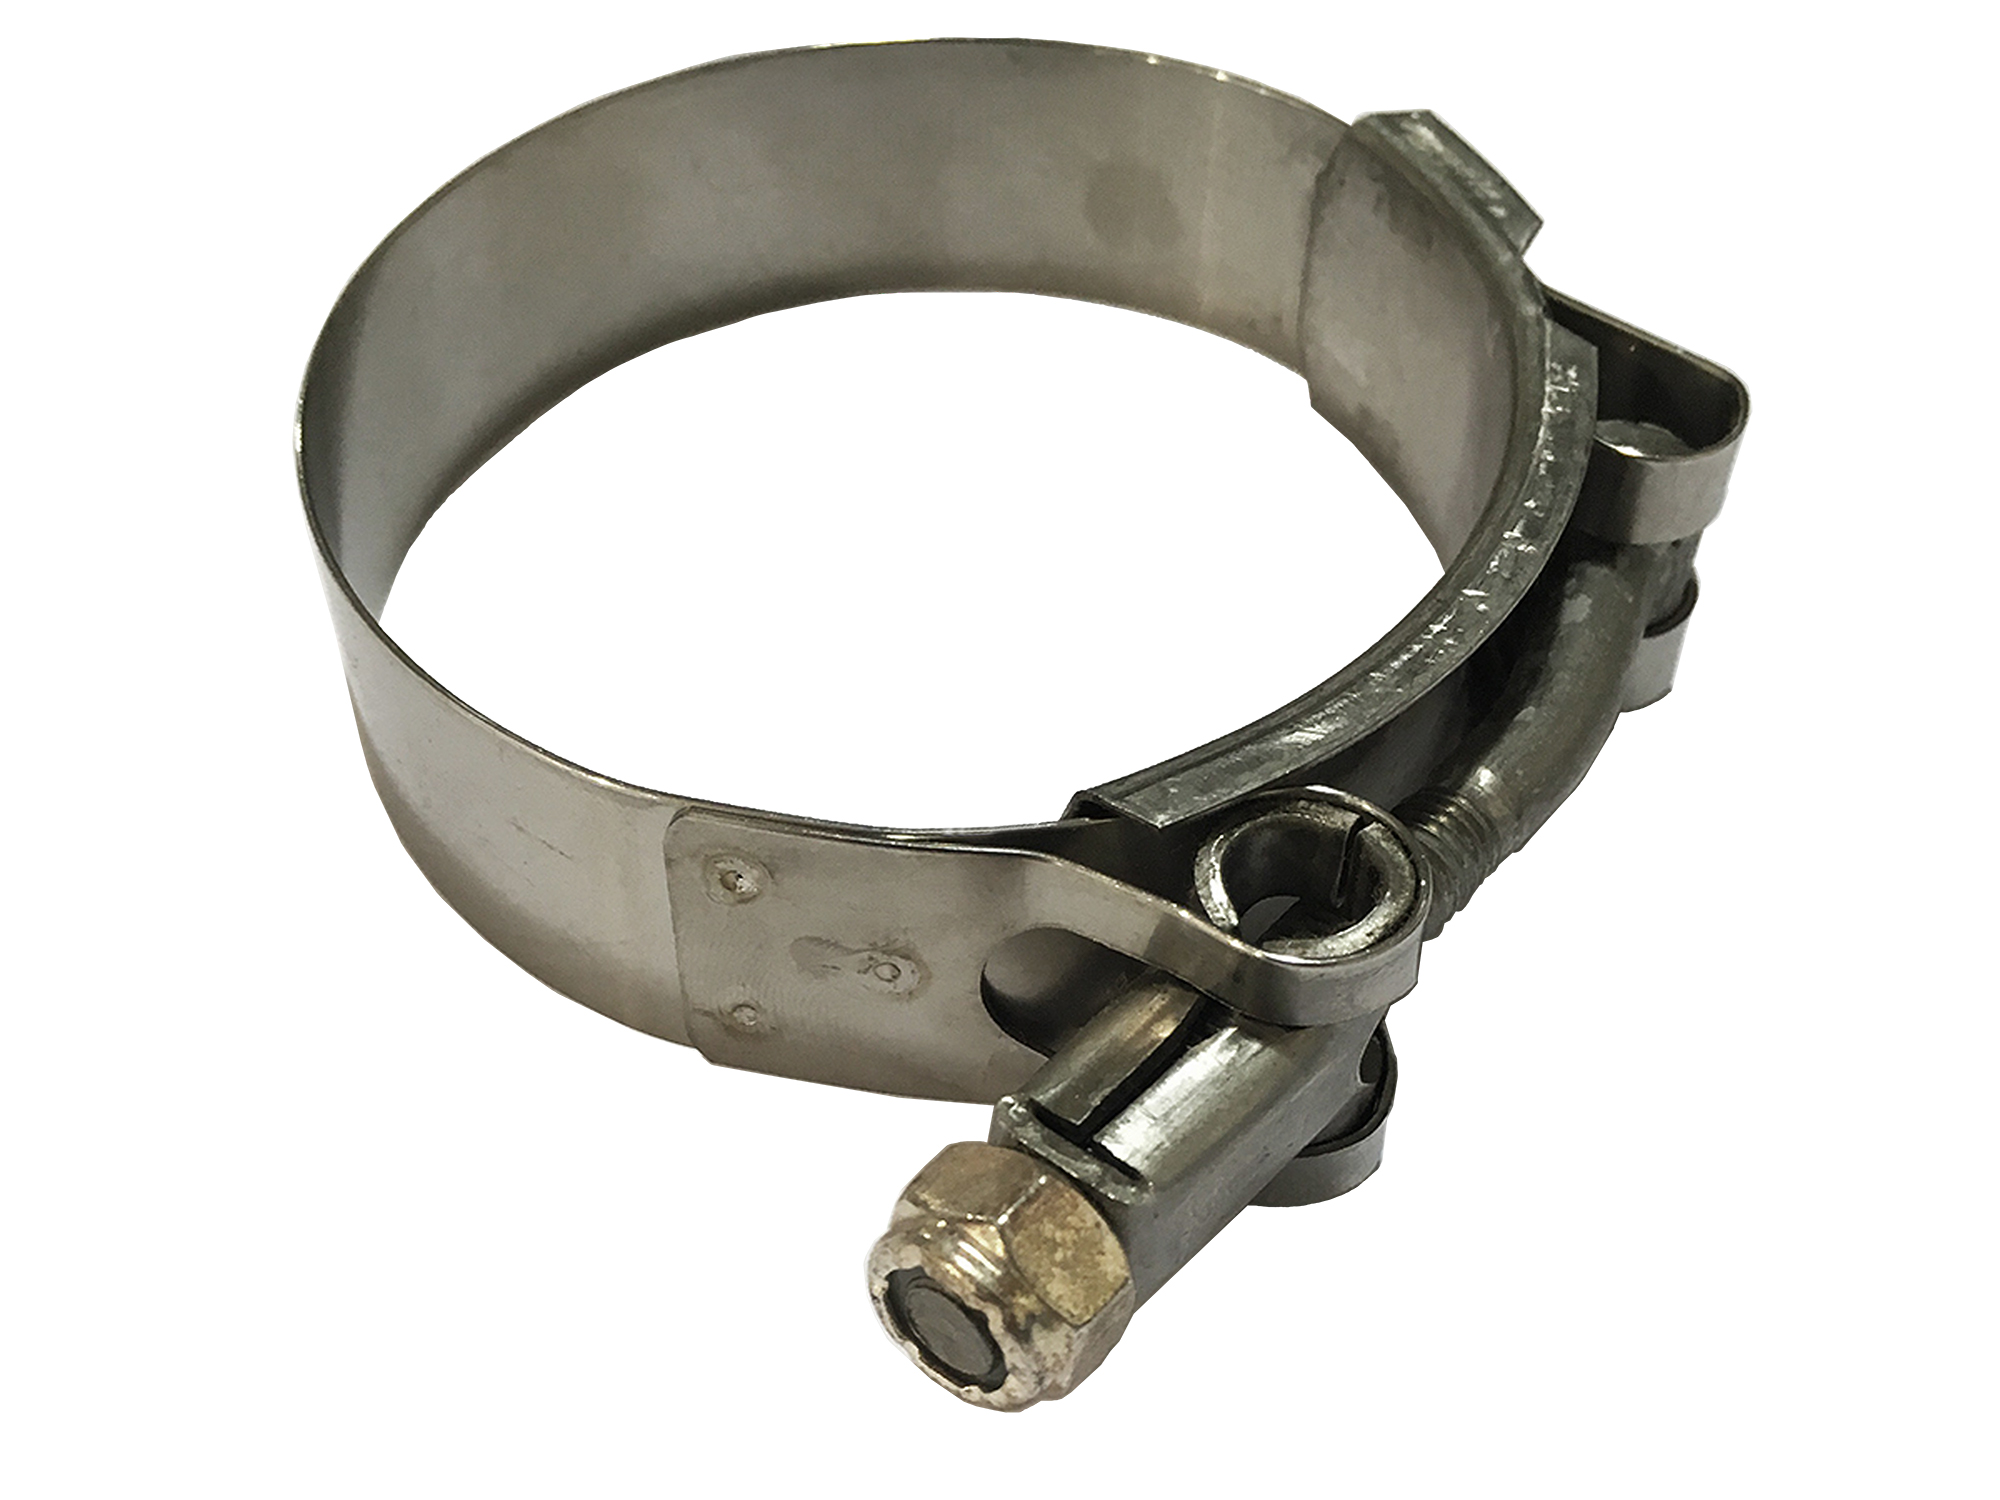 3.56" T Bolt OBX Stainless Steel T-Bolt Clamp 3.25"